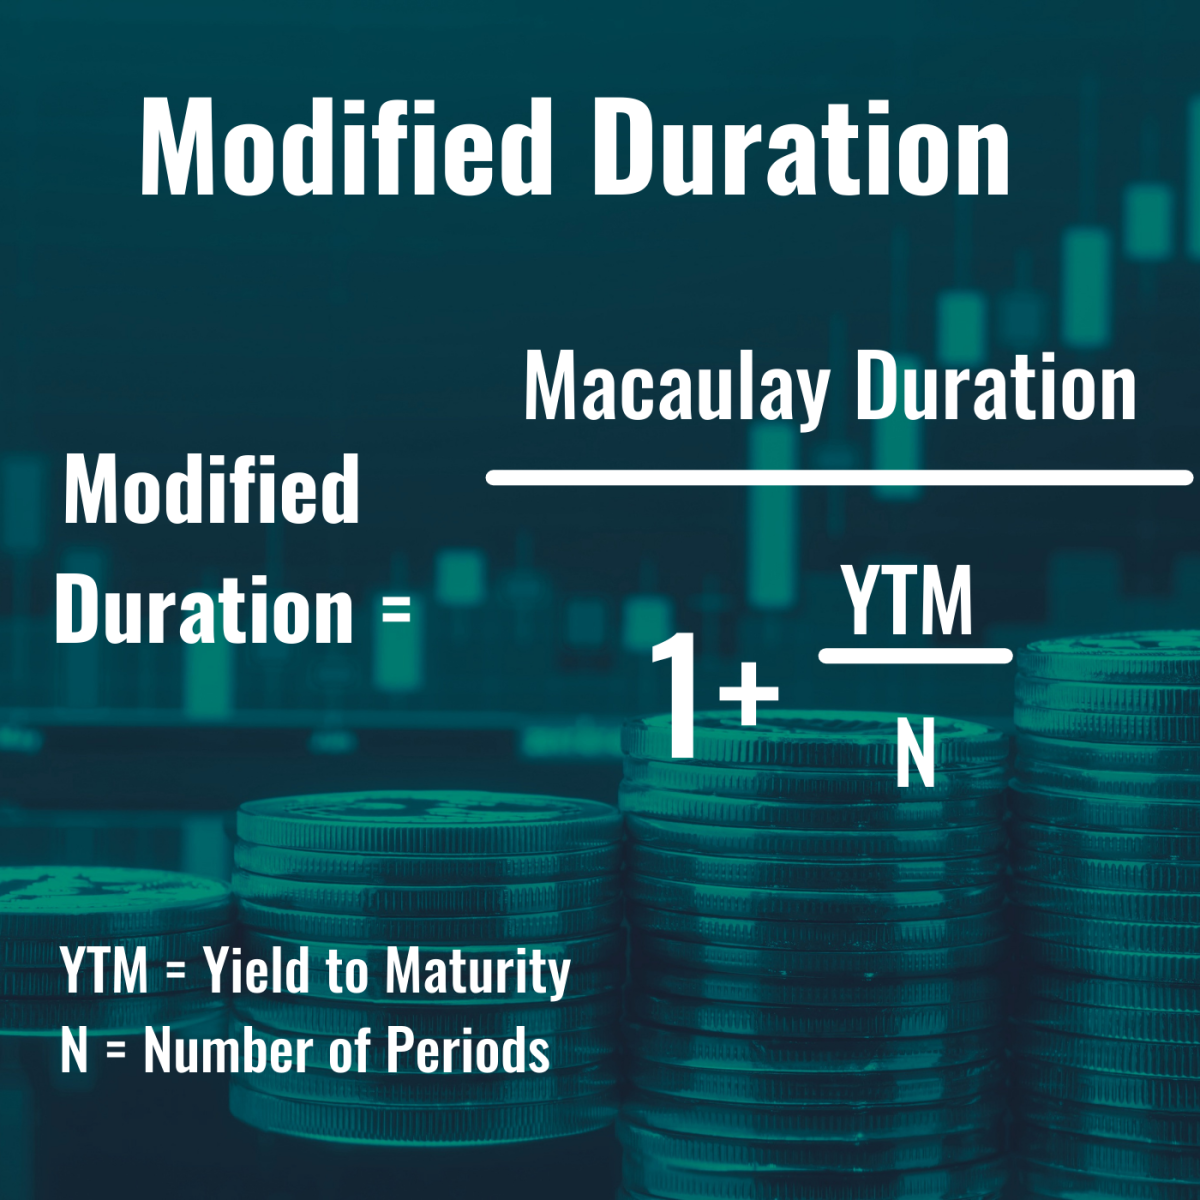 This is the formula used to calculate Modified Duration